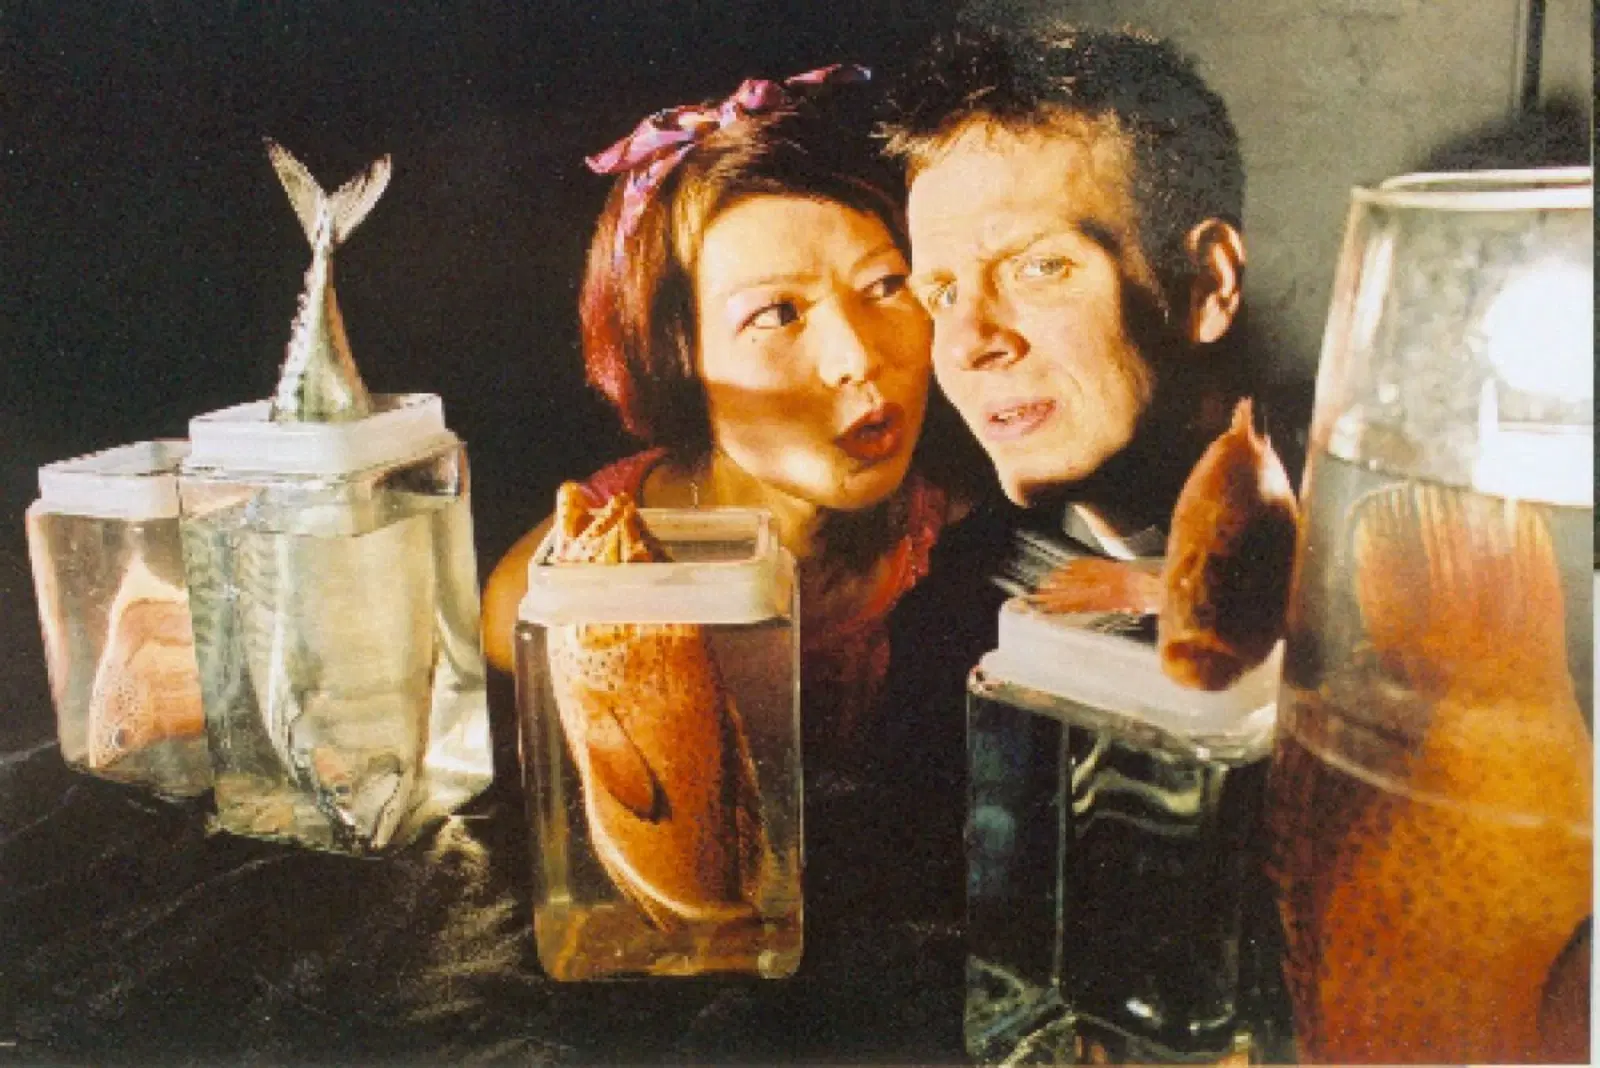 A couple making surprised and humorous faces at fish in transparent containers, evoking a sense of curiosity or playful interaction with marine life.